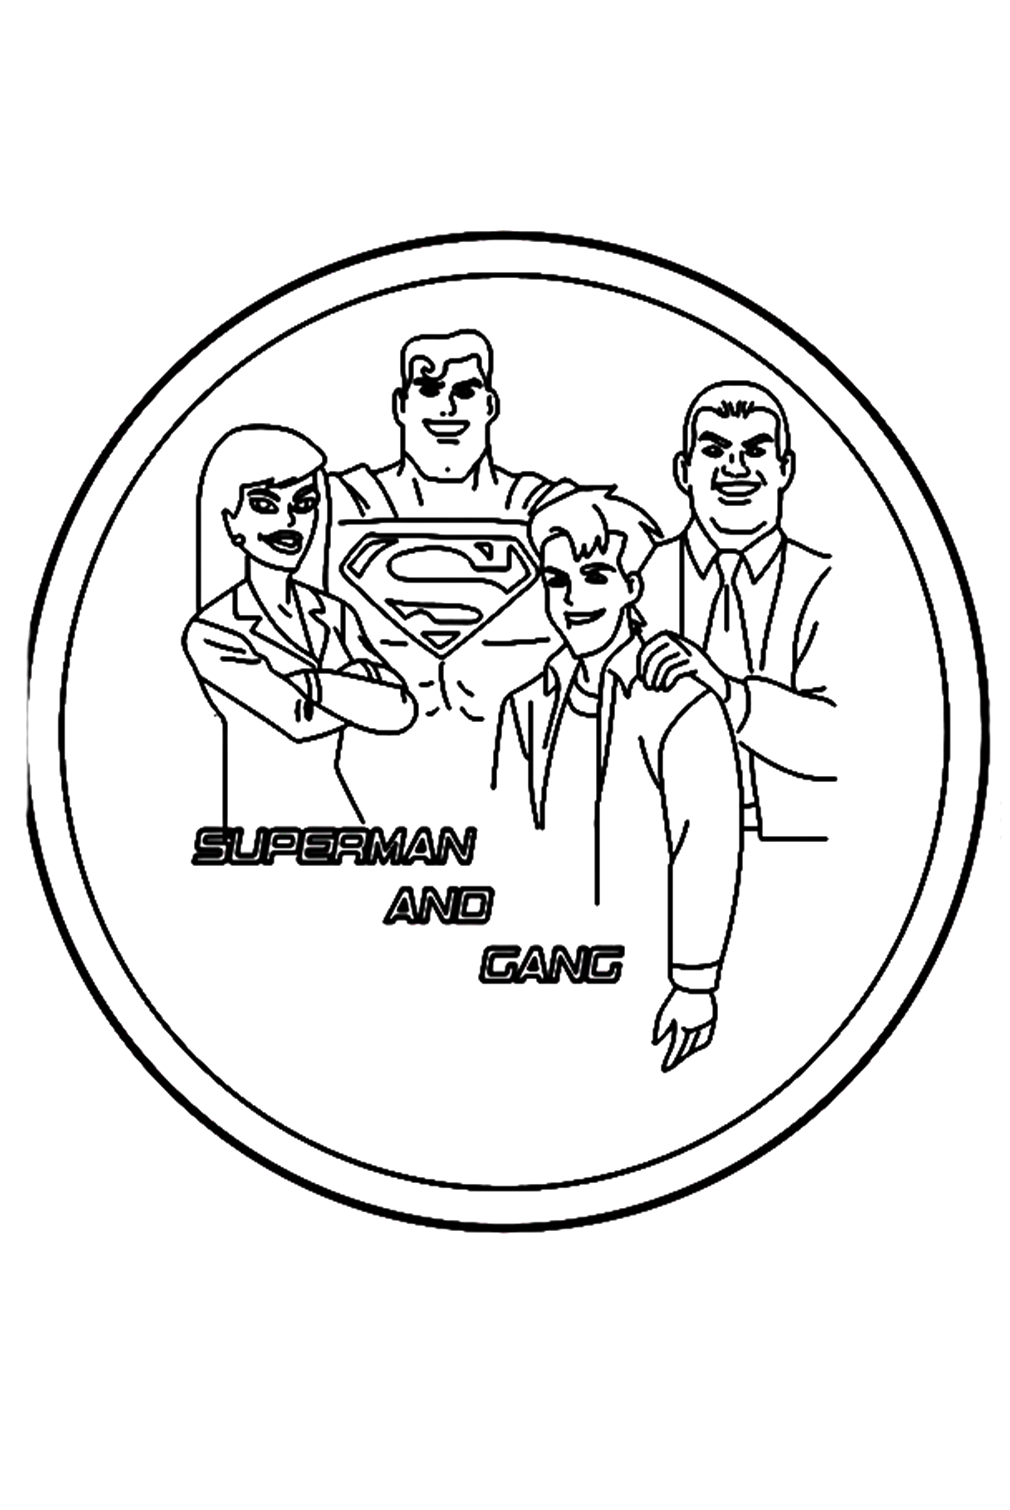 Superman And His Group Coloring Page